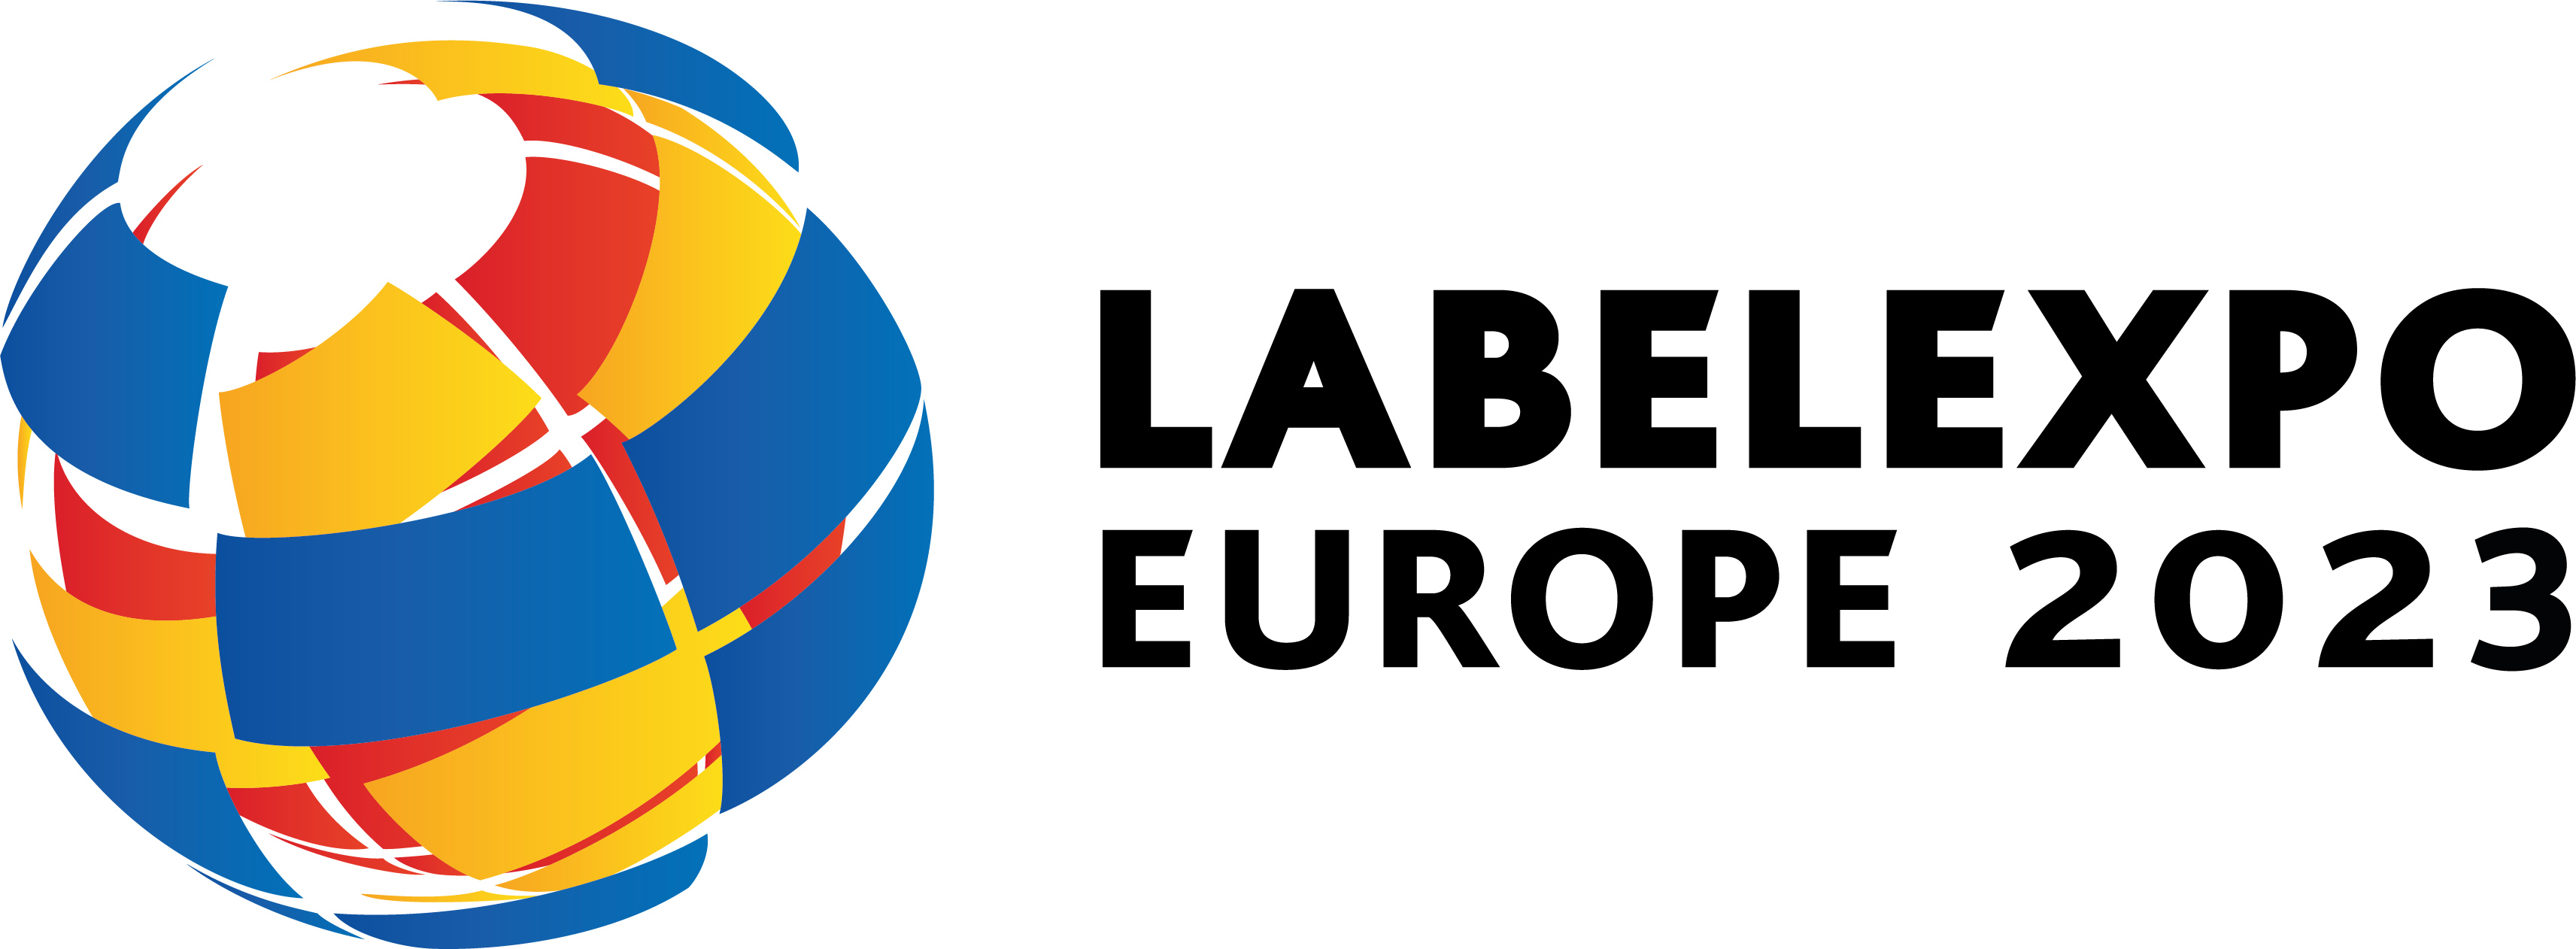 ASHE At Labelexpo 2023 - Brussels